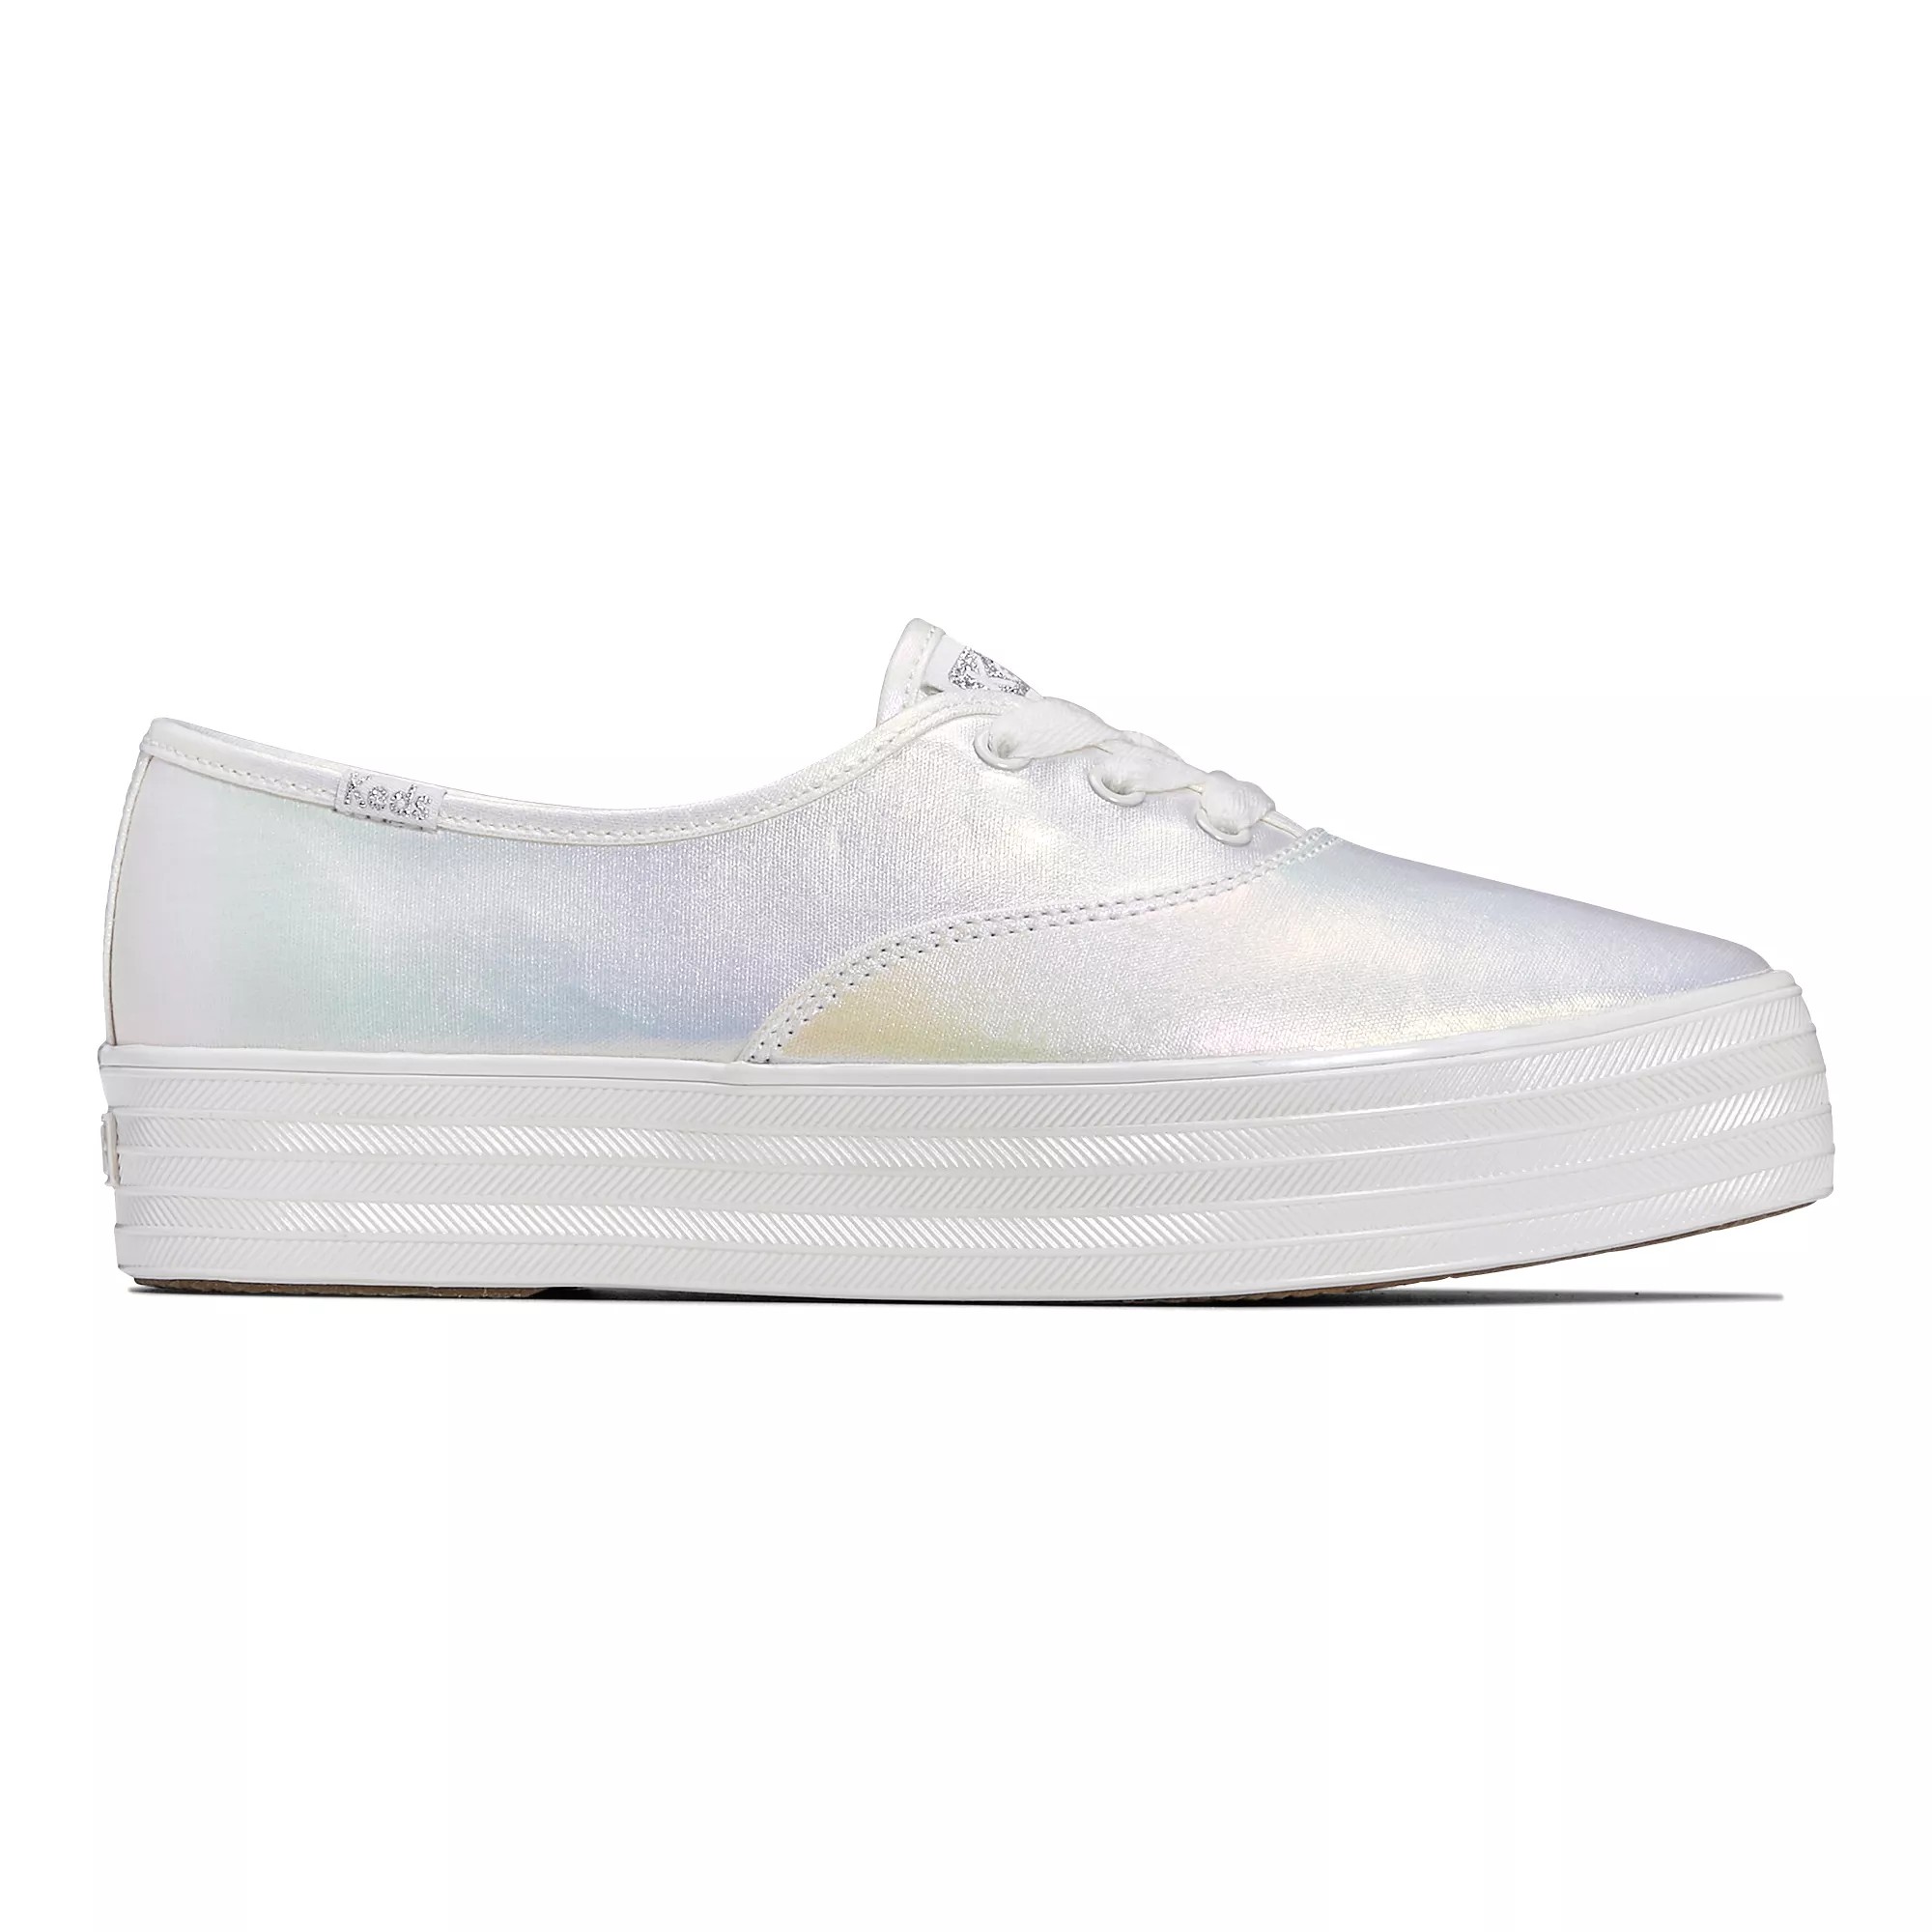 Keds Point Pearlized Lace Up - Free Shipping | KEDS